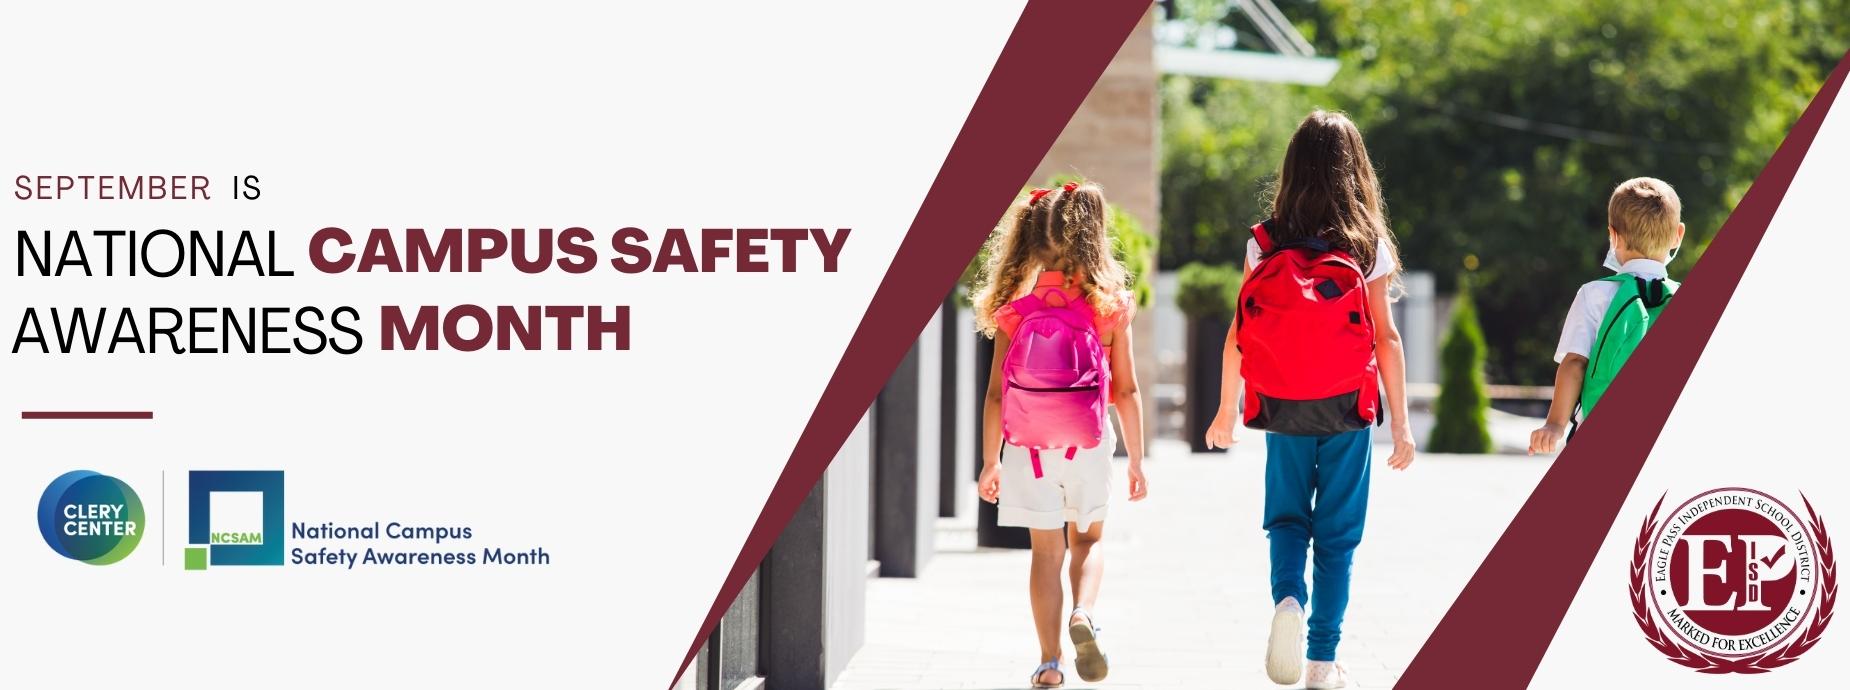 National Campus Safety Awareness Month Banner